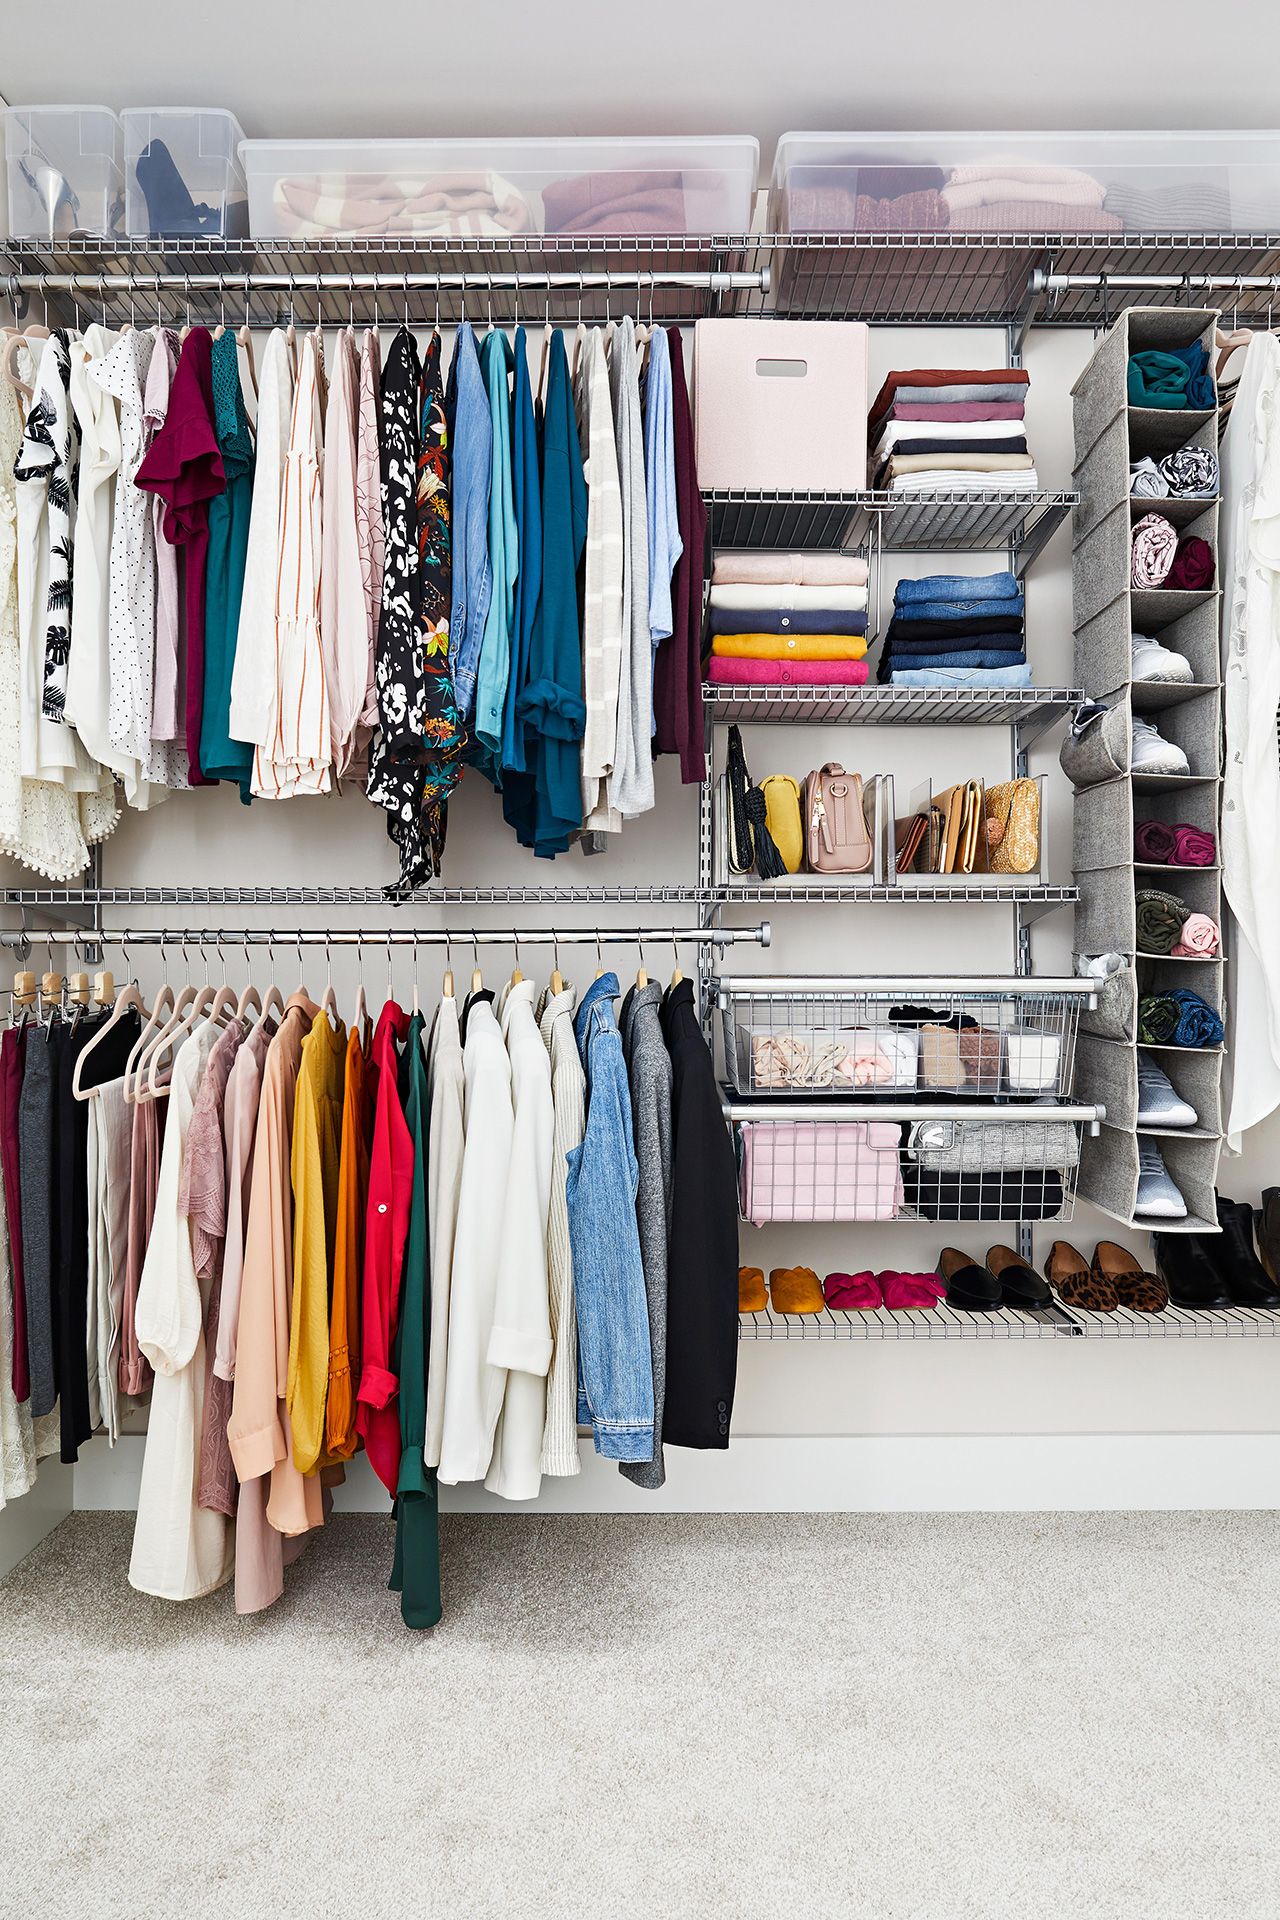 Furniture For A Well organized Closet Or Dressing Area